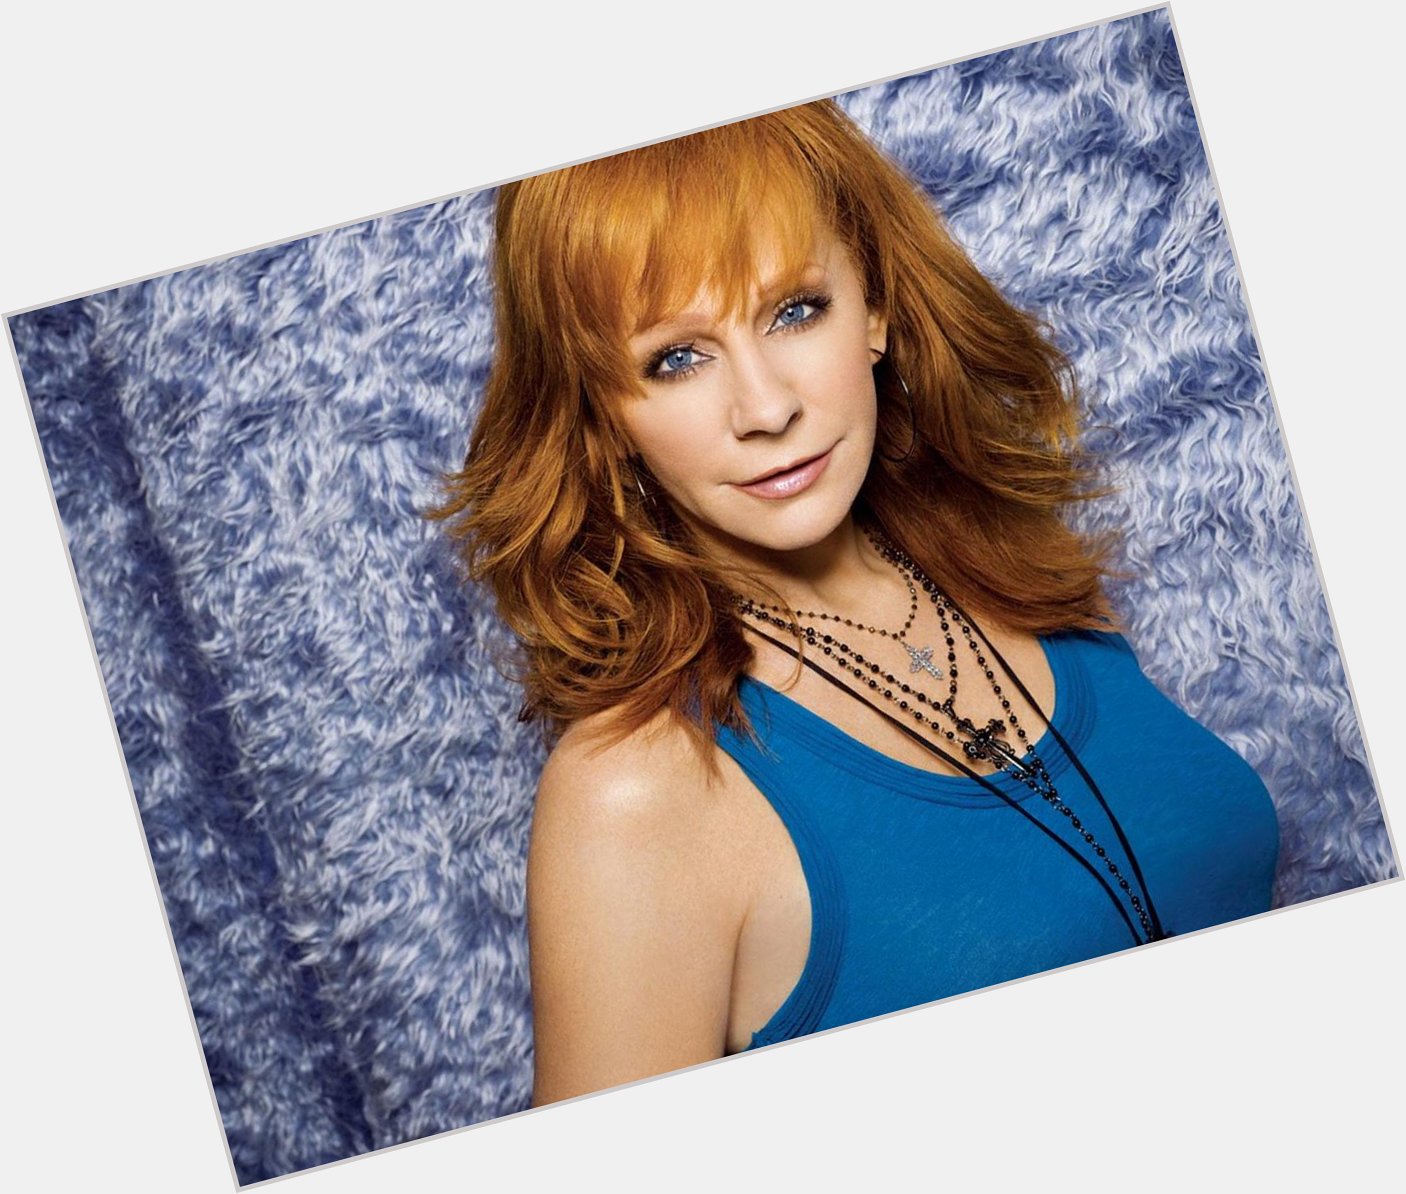 Happy Birthday to Reba McEntire, who turns 60 today! 